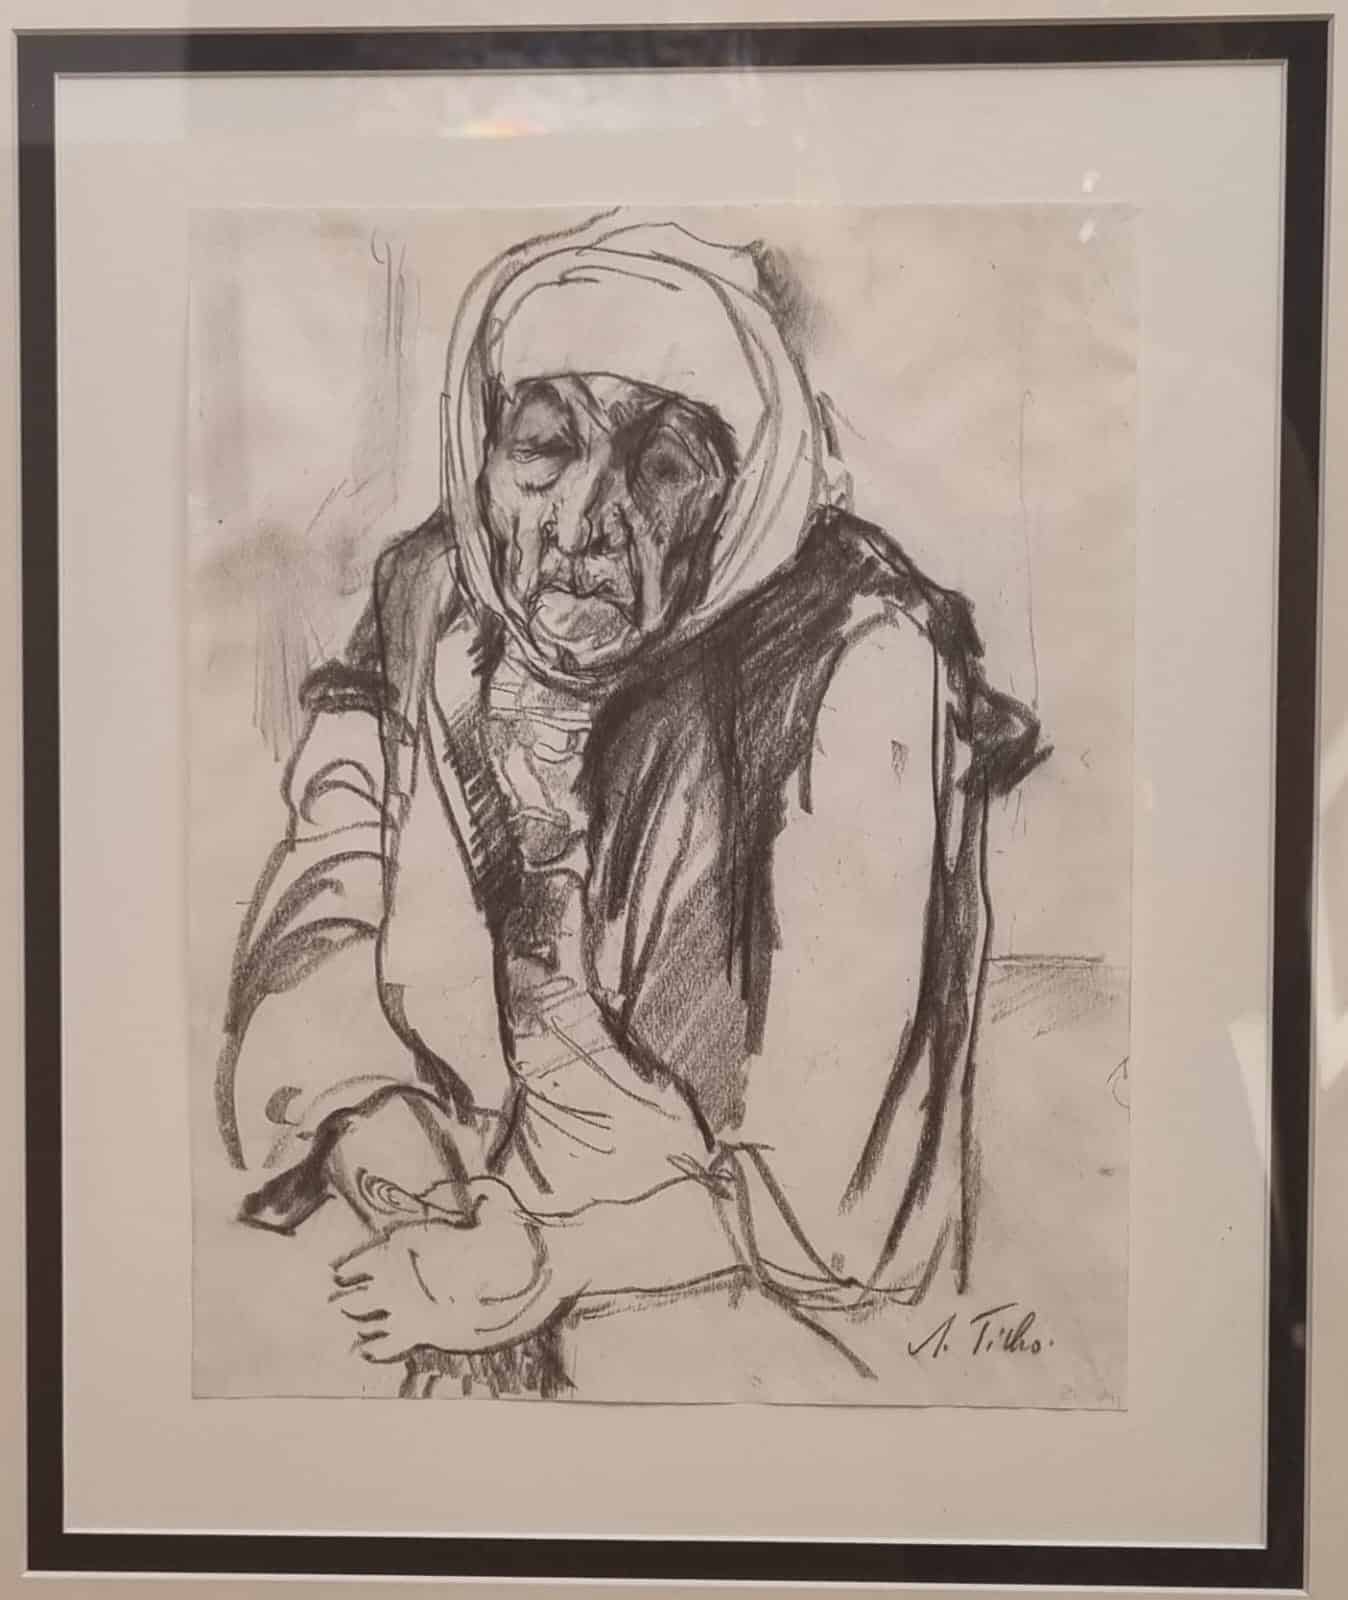 “Old Woman” by Anna Ticho